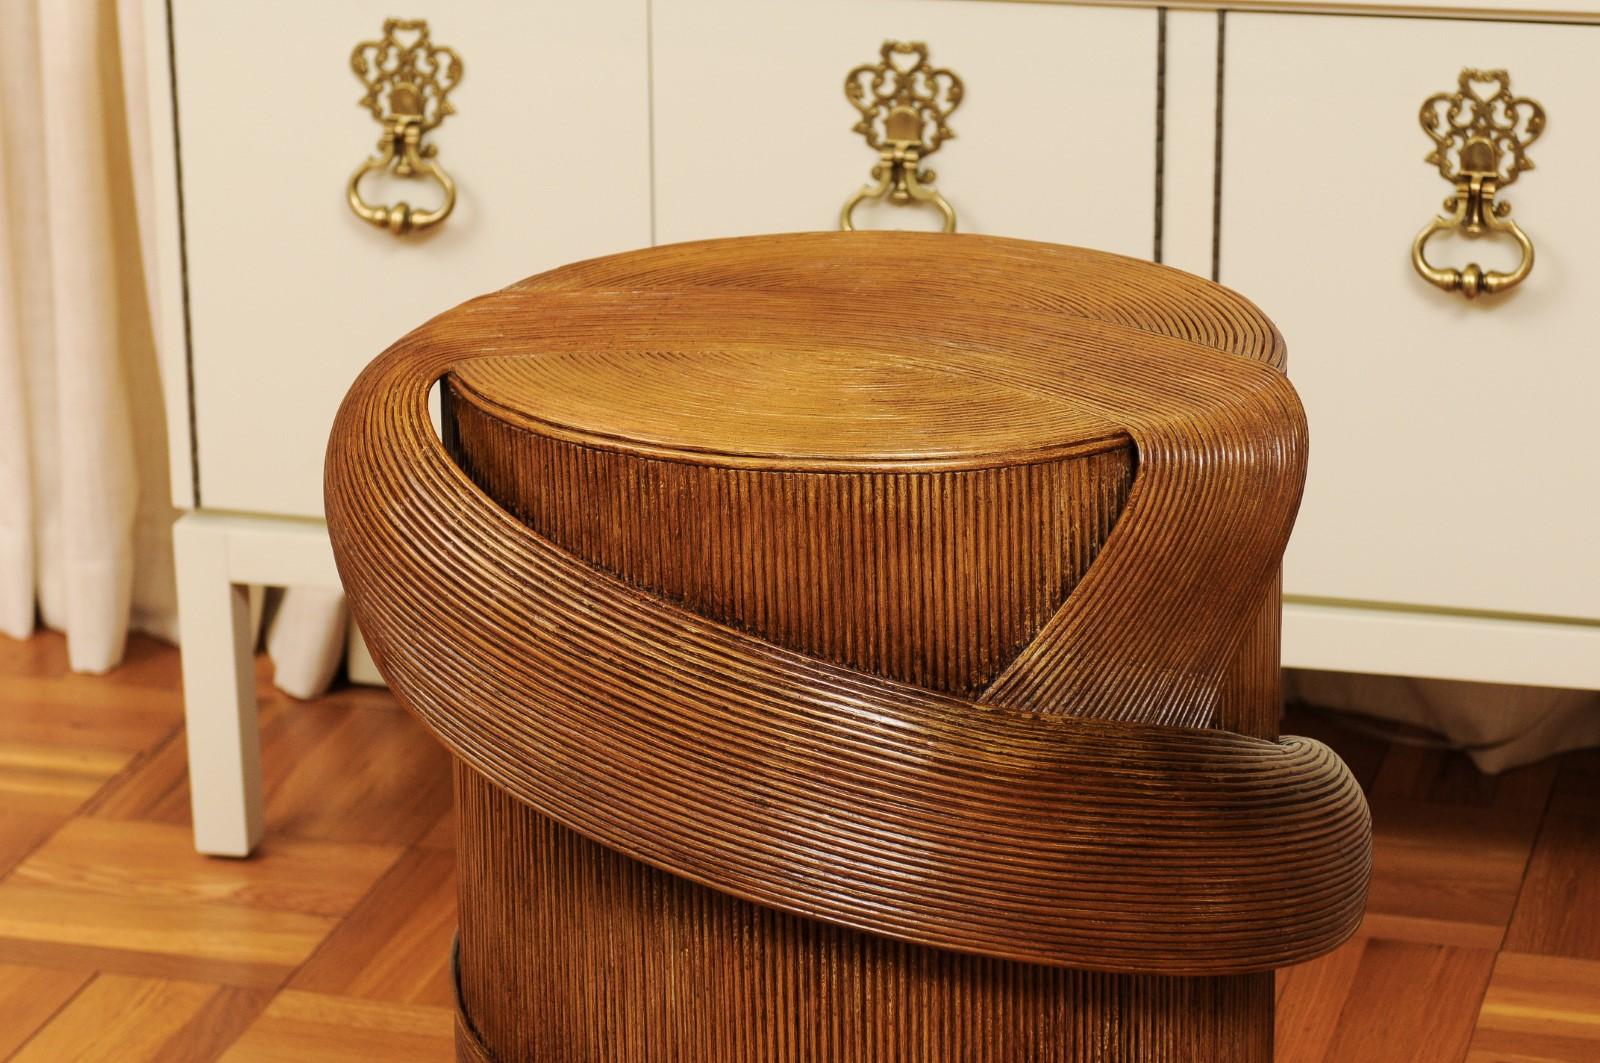 Philippine Breathtaking Trompe L'oiel Dining or Center Table Base by Betty Cobonpue For Sale